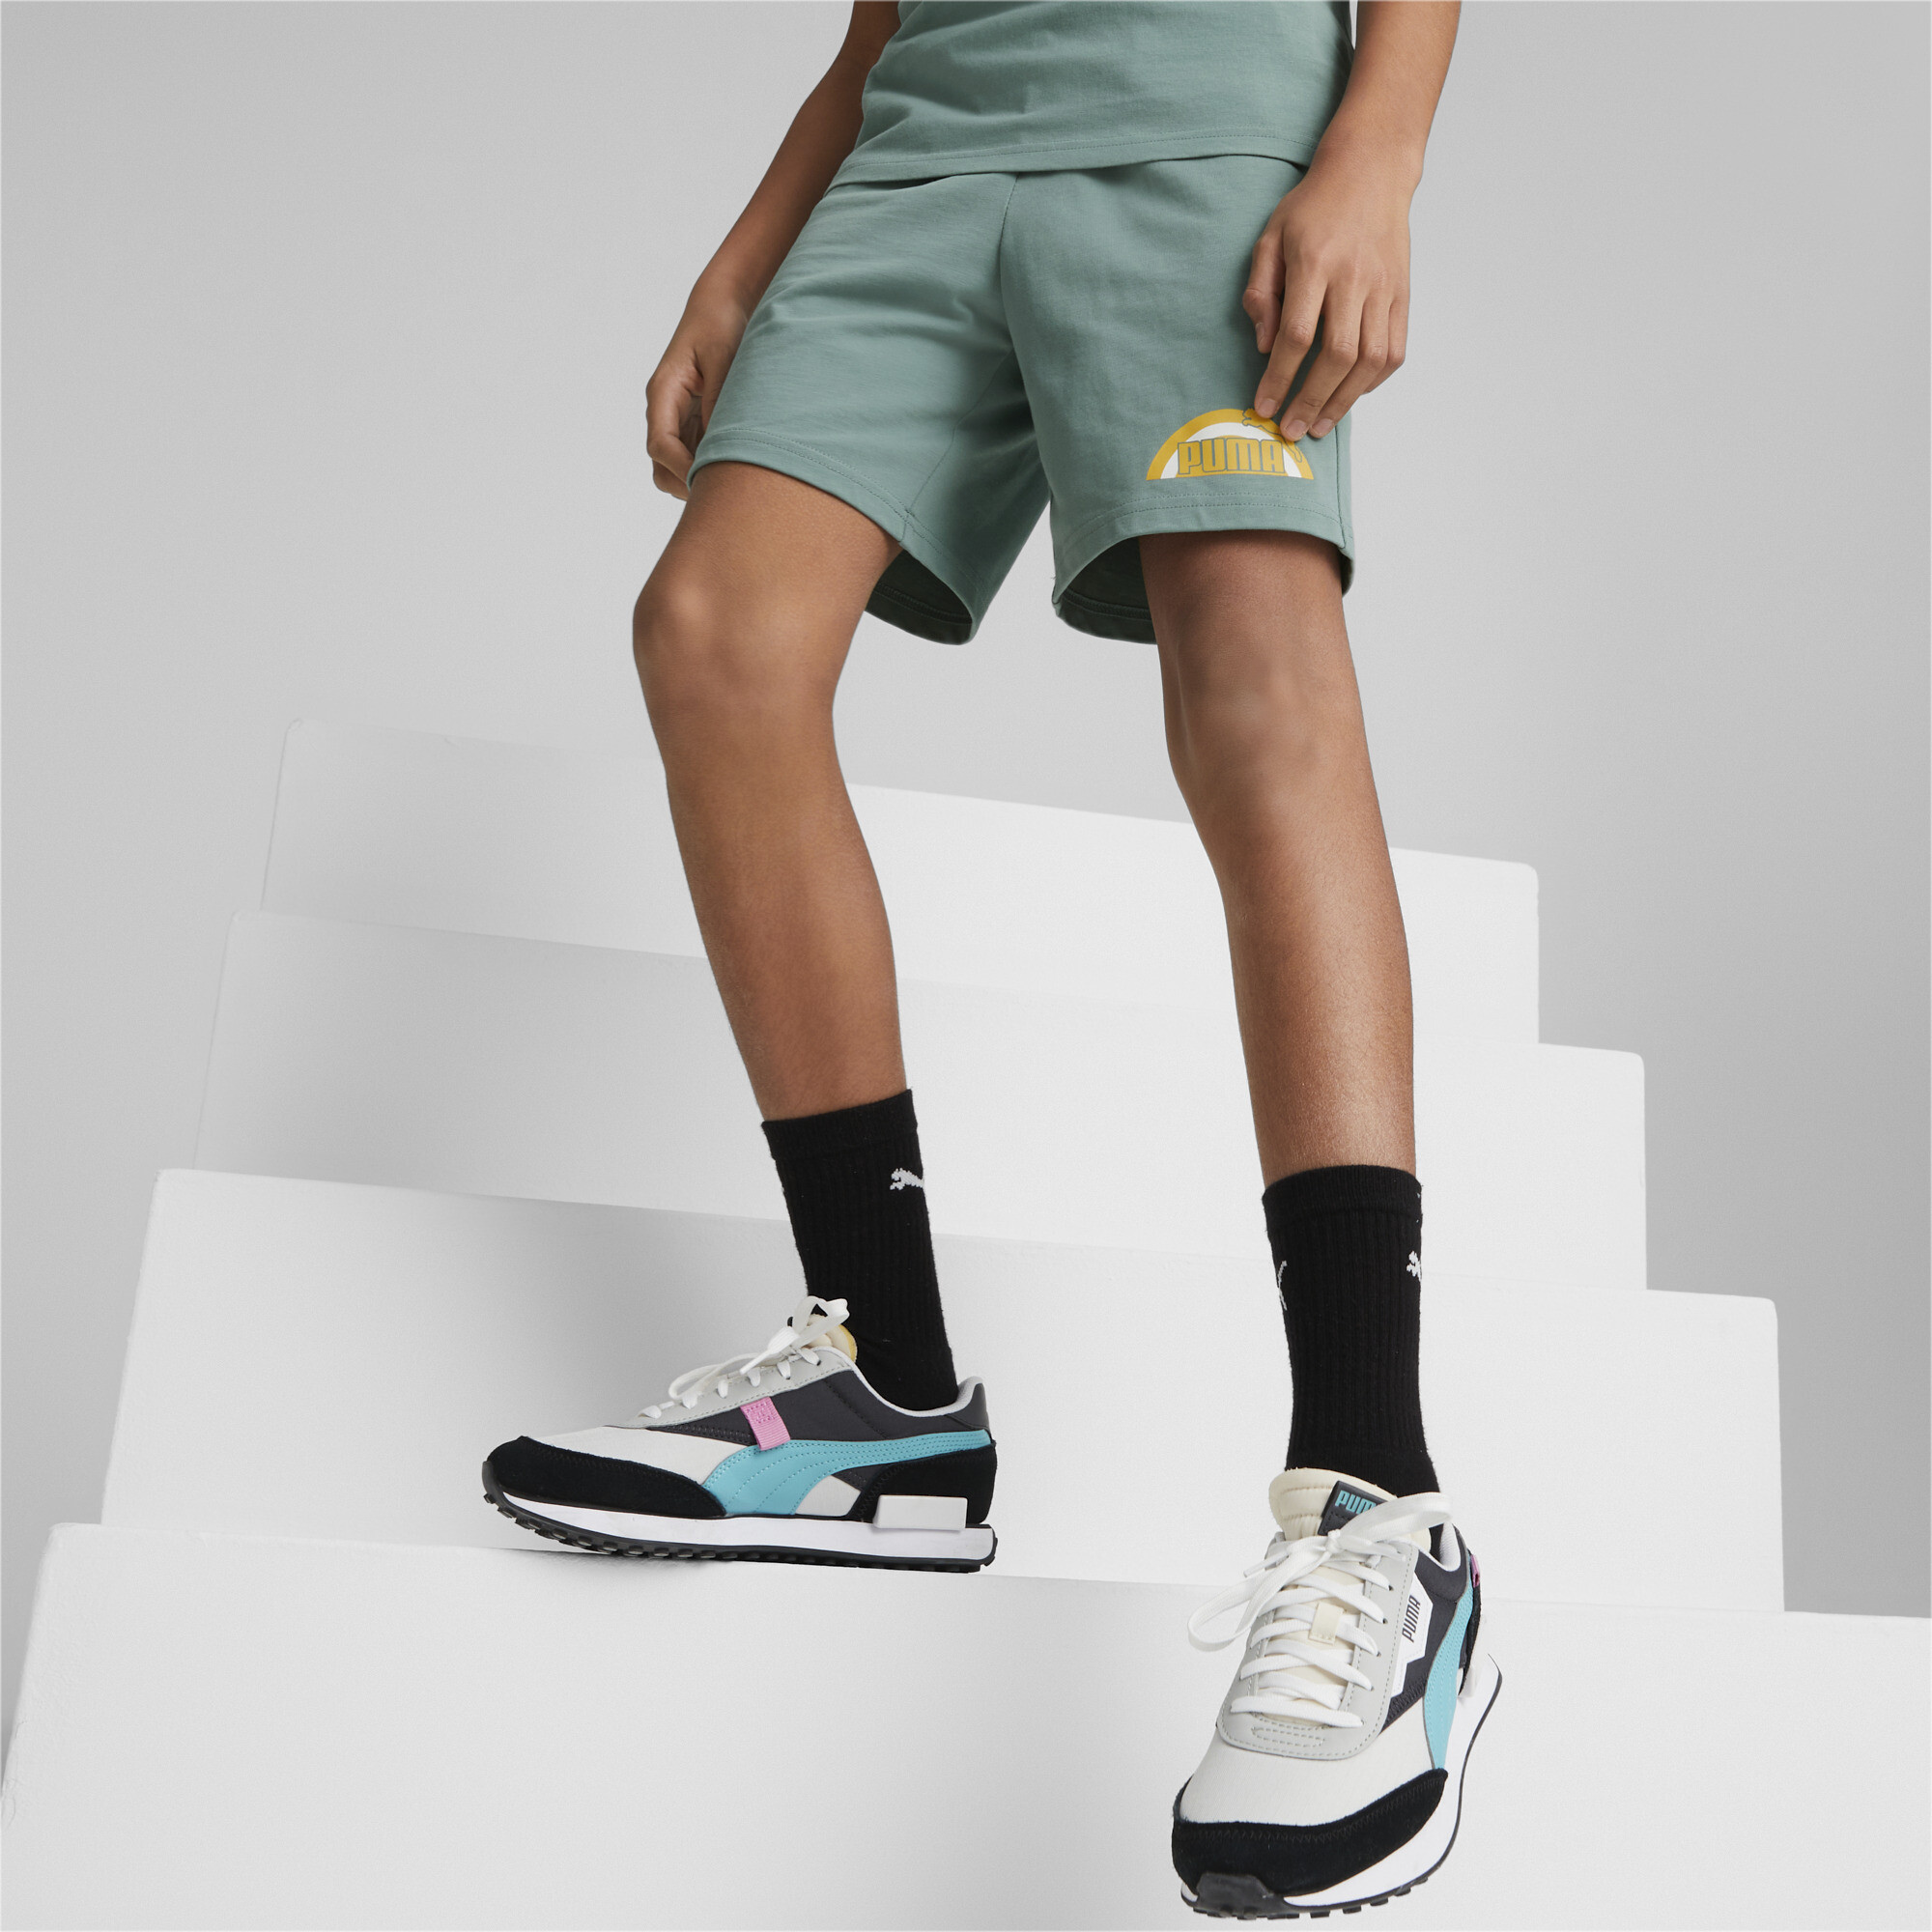 PUMA Essentials+ Street Art Shorts In Gray, Size 9-10 Youth